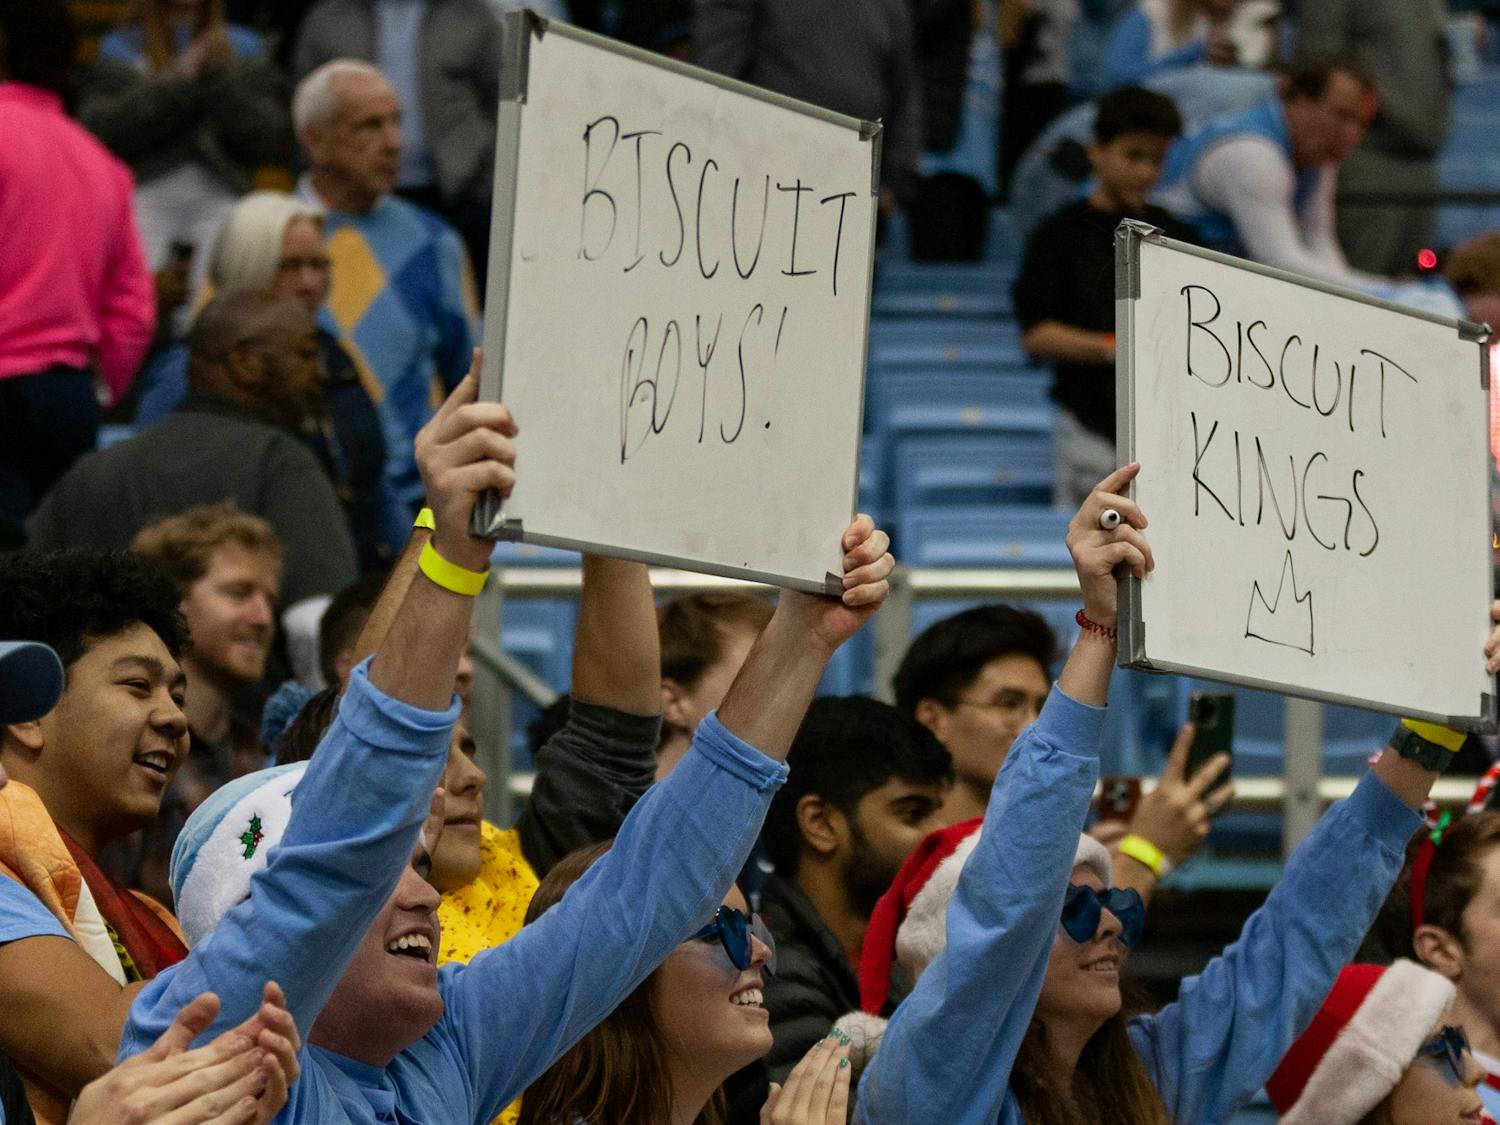 UNC students hold up signs that read "Biscuit Boys" and "Biscuit Kings" after the men's basketball game against The Citadel at the Dean Smith Center on Tuesday, Dec. 13, 2022. UNC beat The Citadel 100-67.